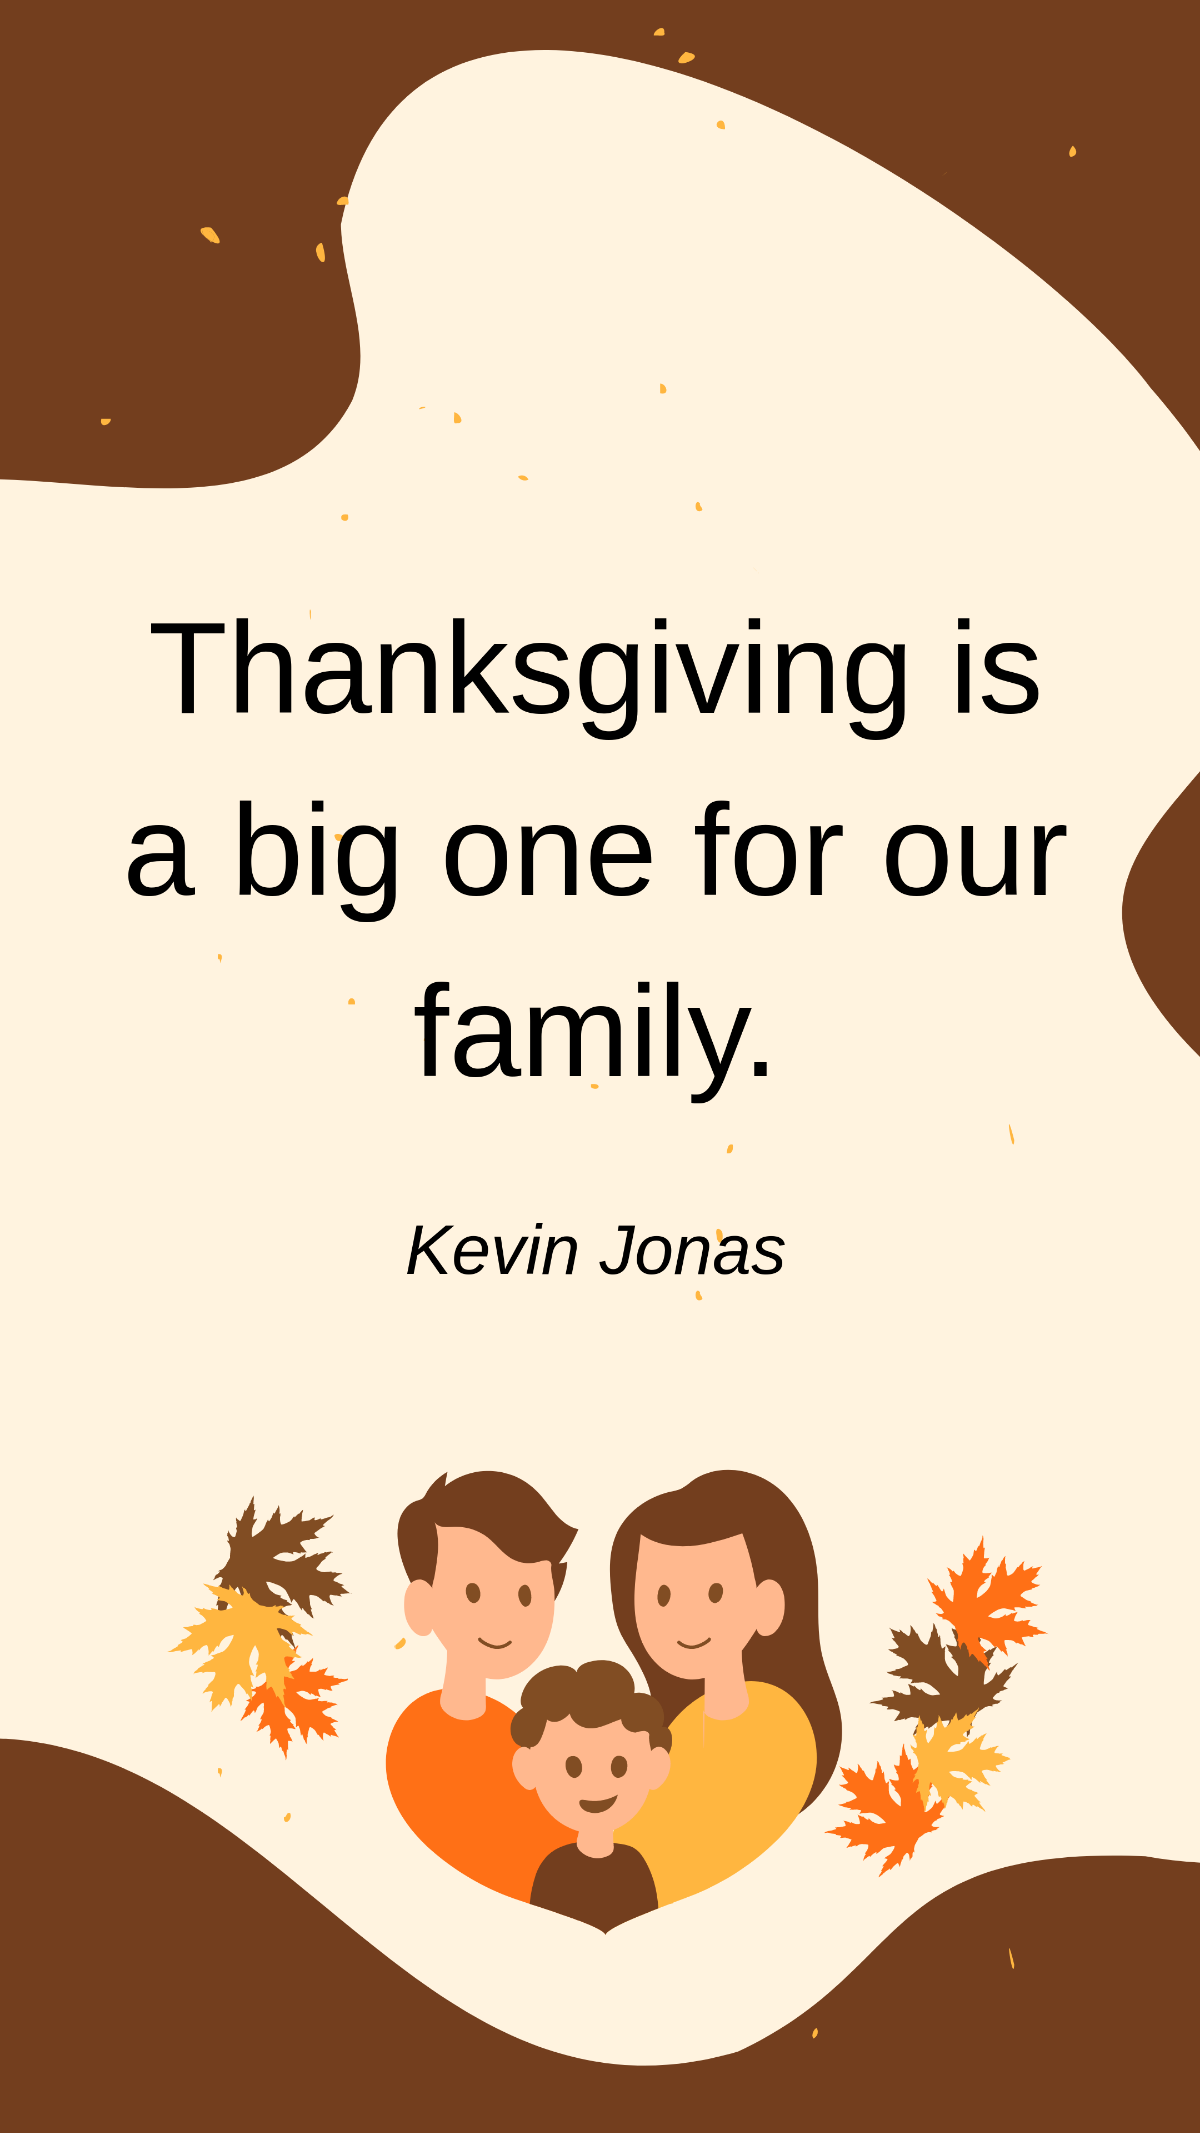 Kevin Jonas - Thanksgiving is a big one for our family. Template